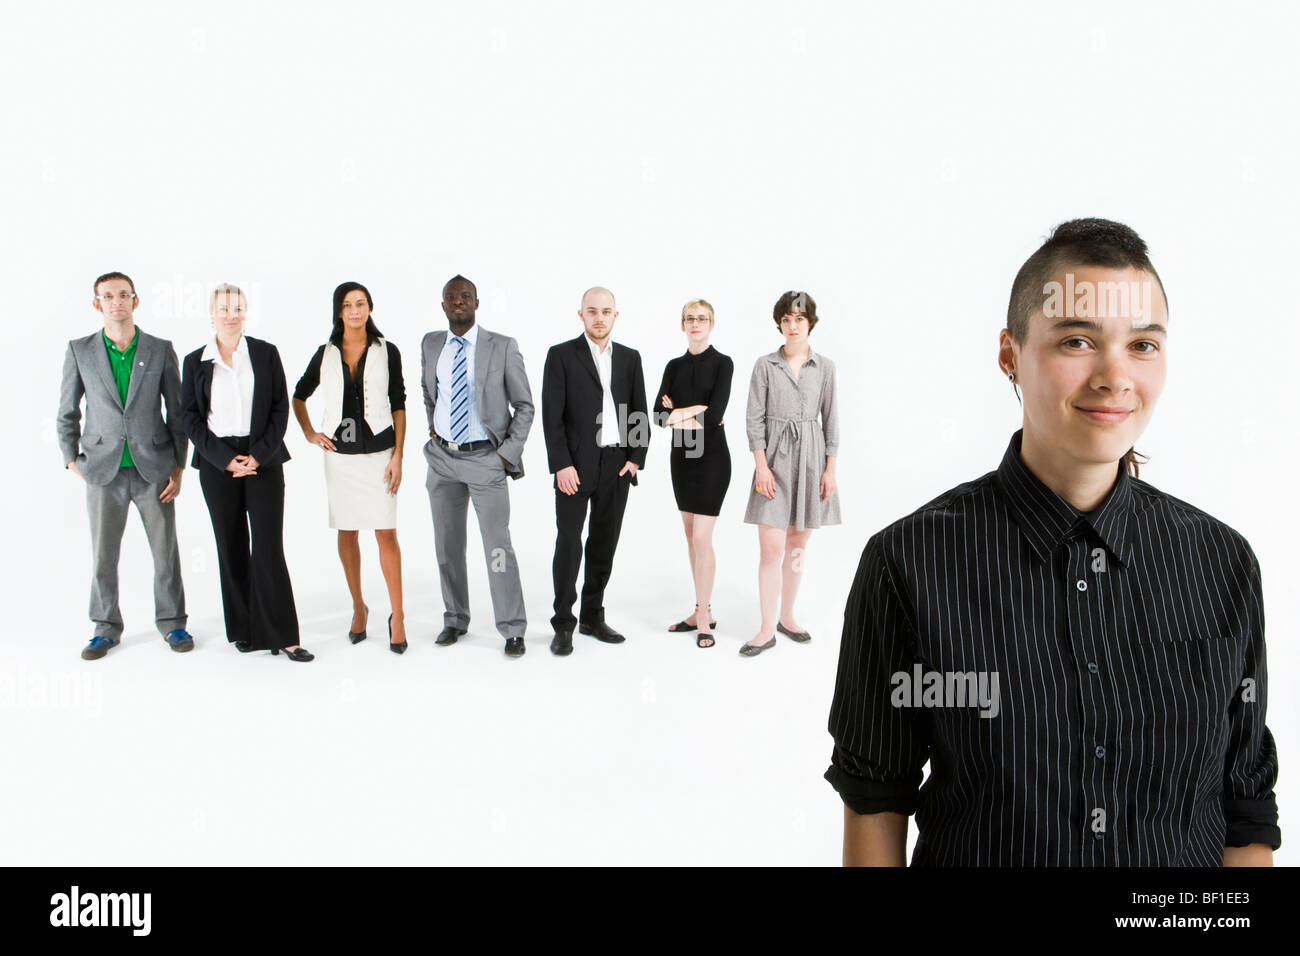 A young professional in front of a row of business people Stock Photo